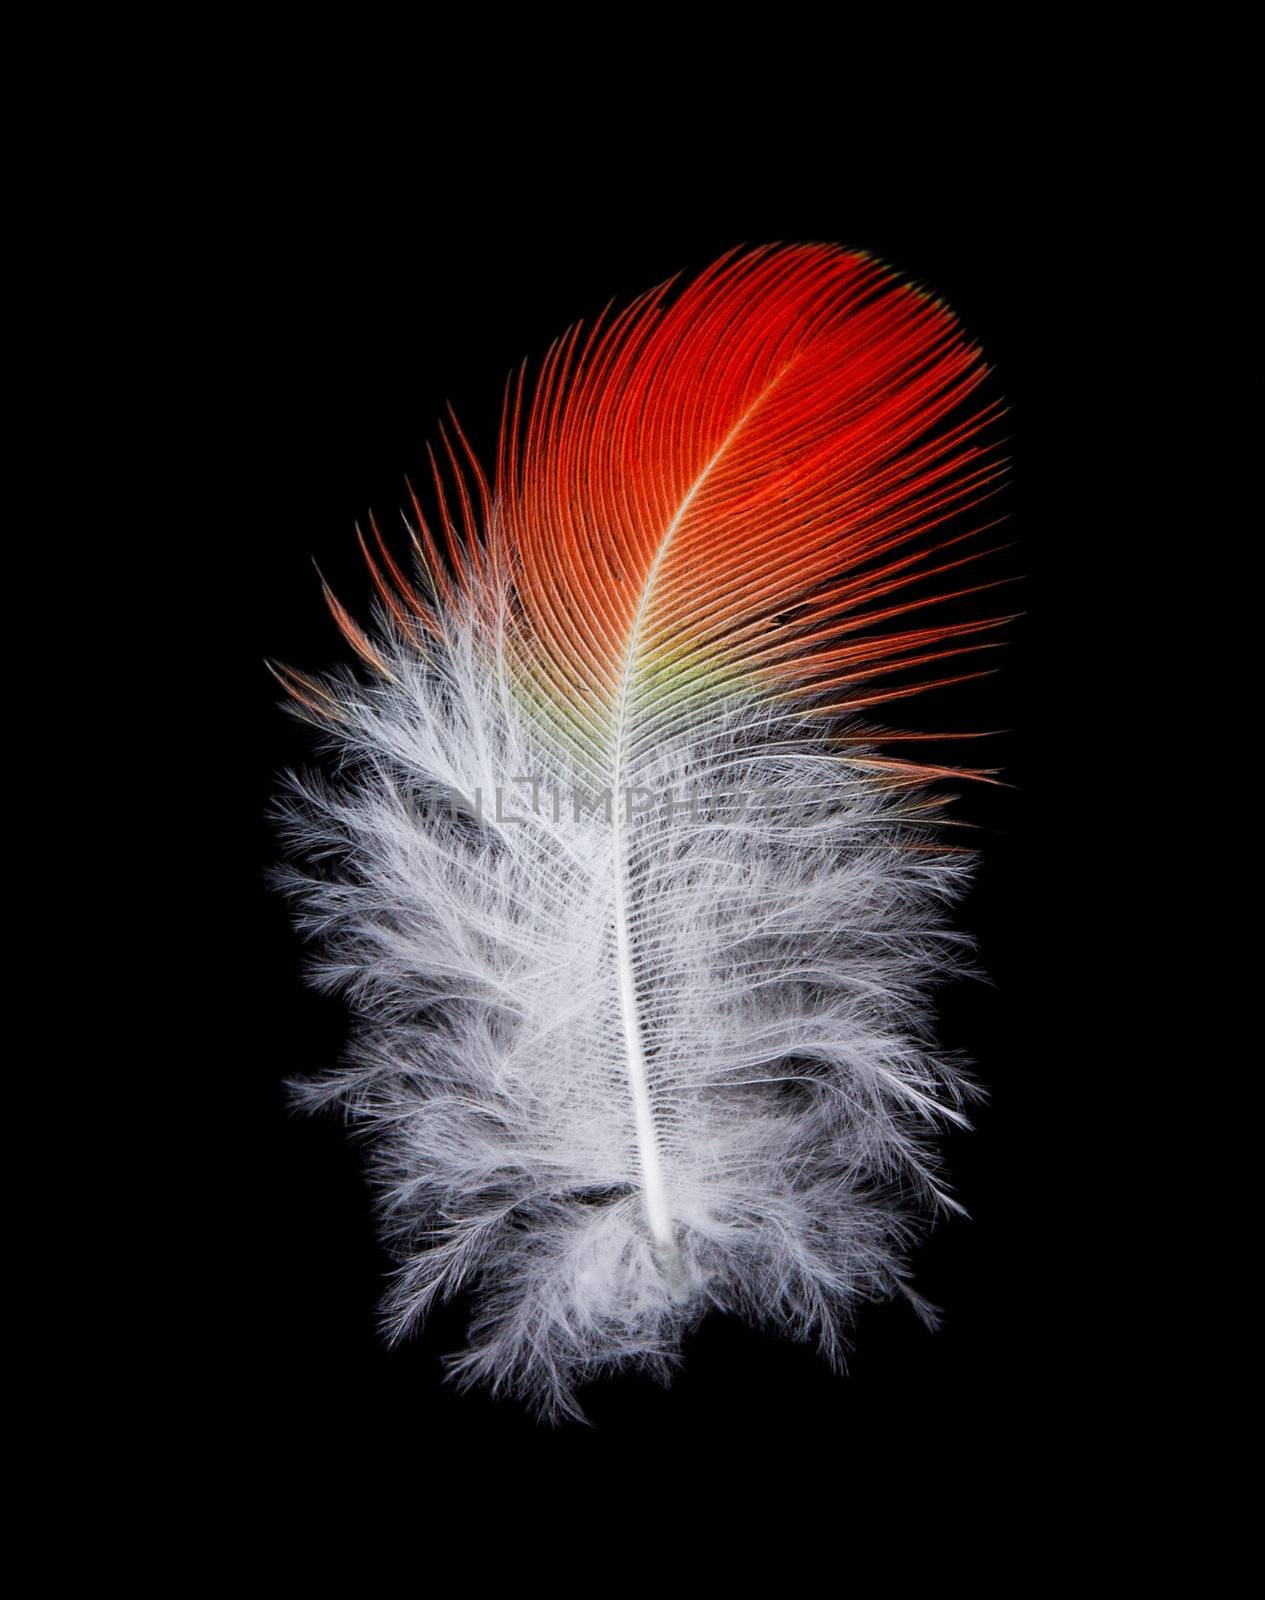 close-up feather, isolated on black